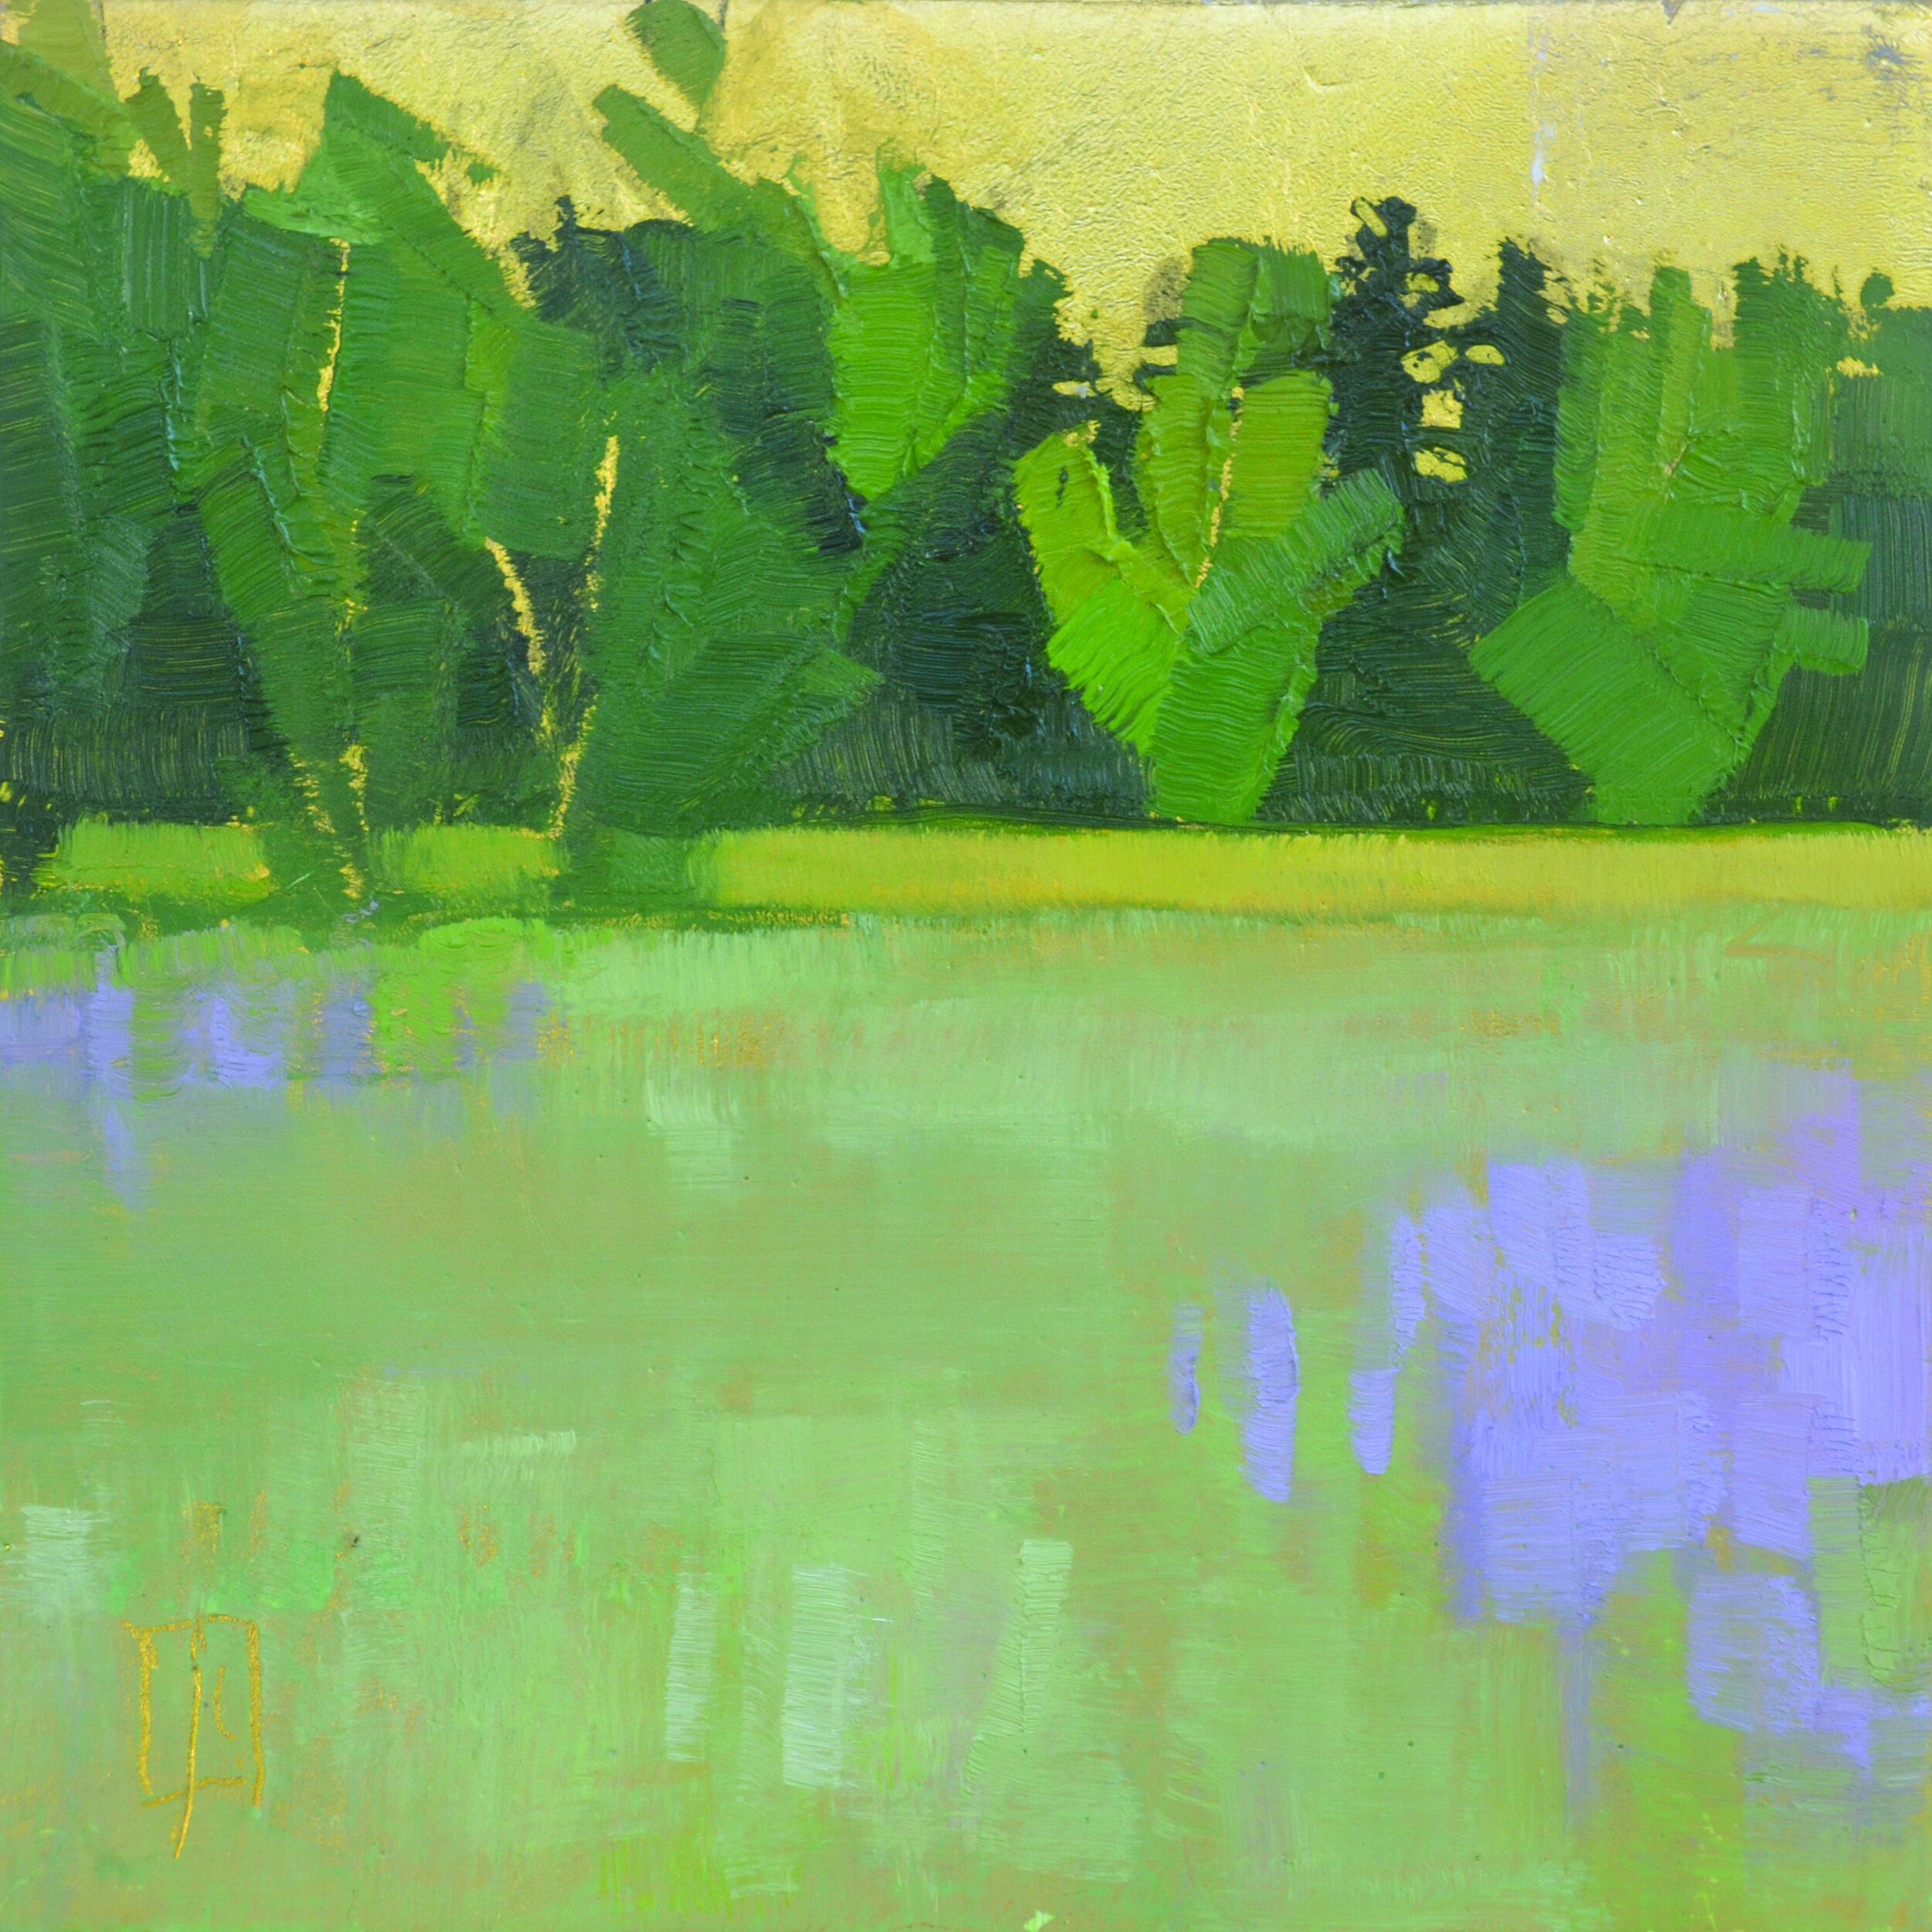   Lupine Field I  4 x 4 oil, gold on wood  sold   